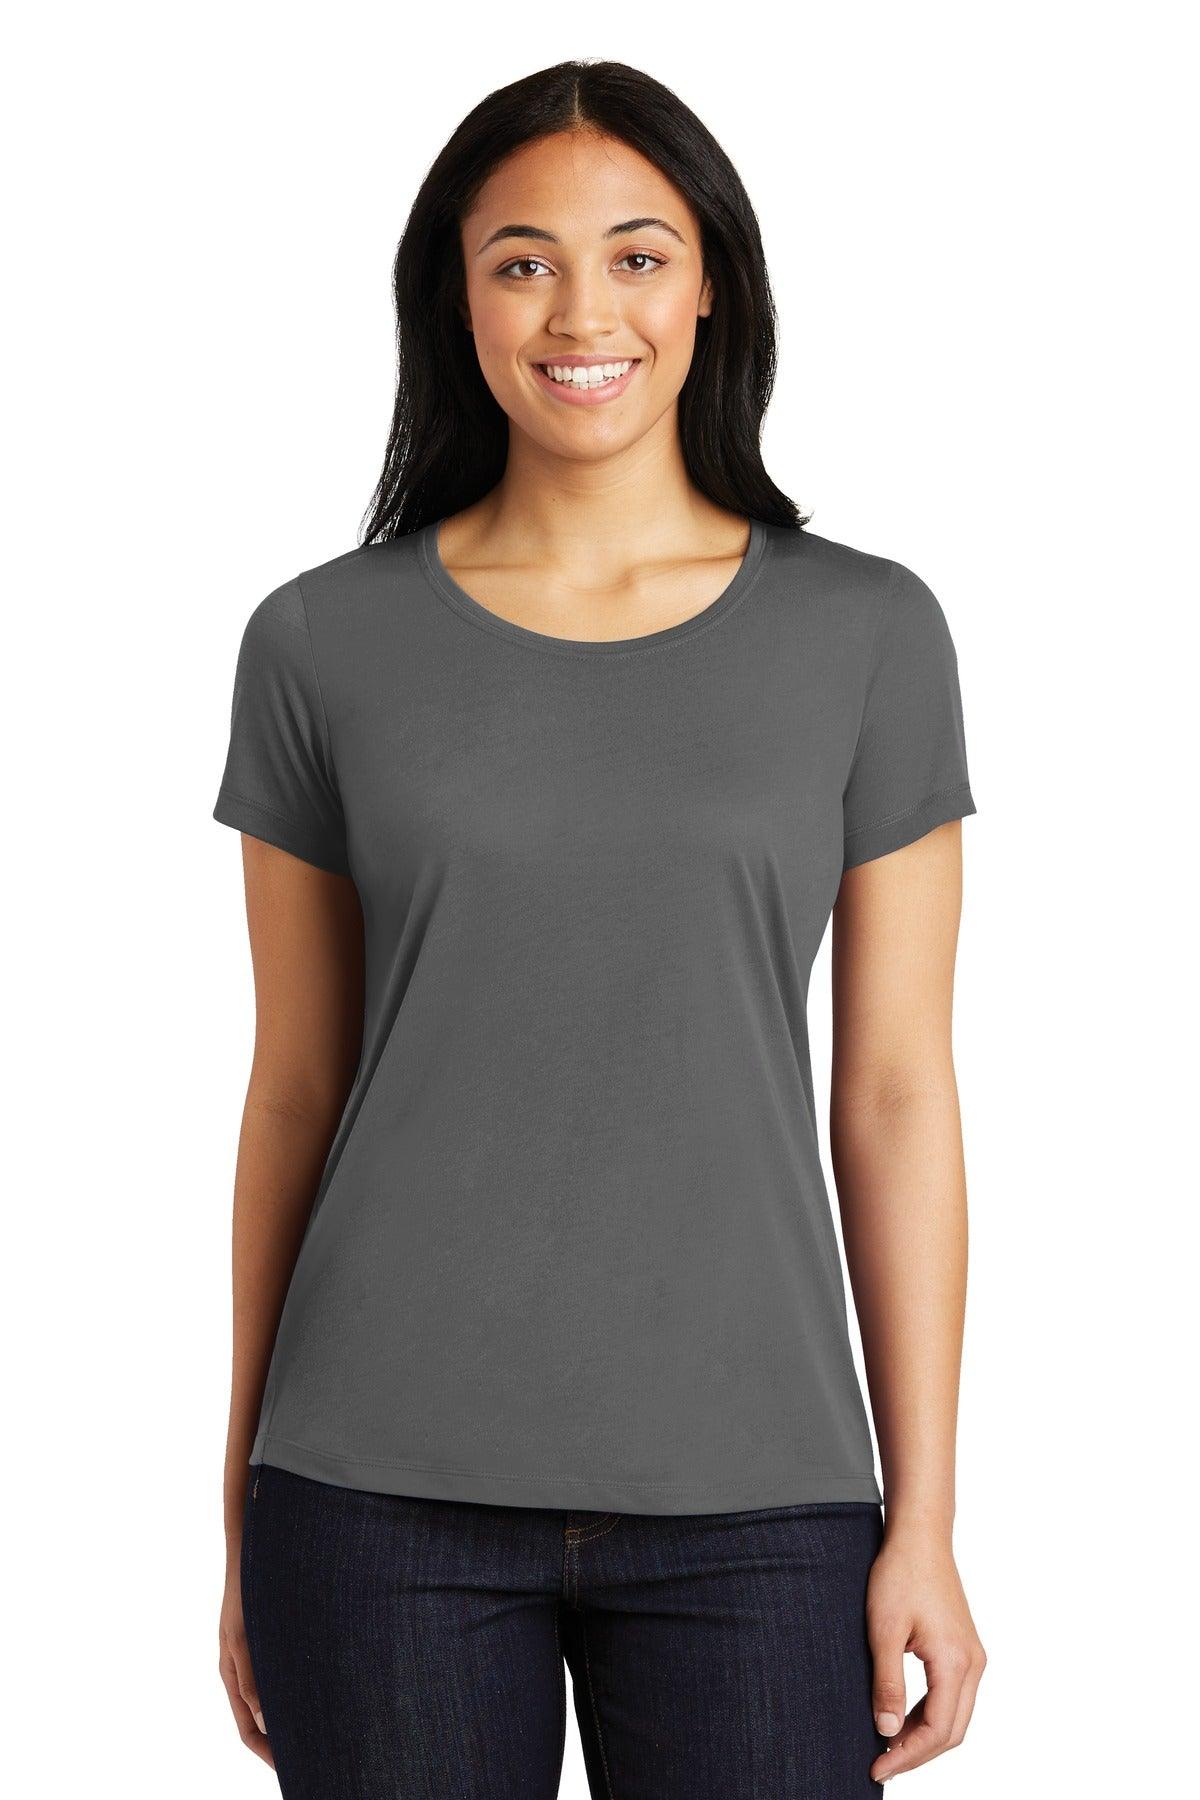 Sport-Tek Ladies PosiCharge Competitor Cotton Touch Scoop Neck Tee. LST450 - Dresses Max